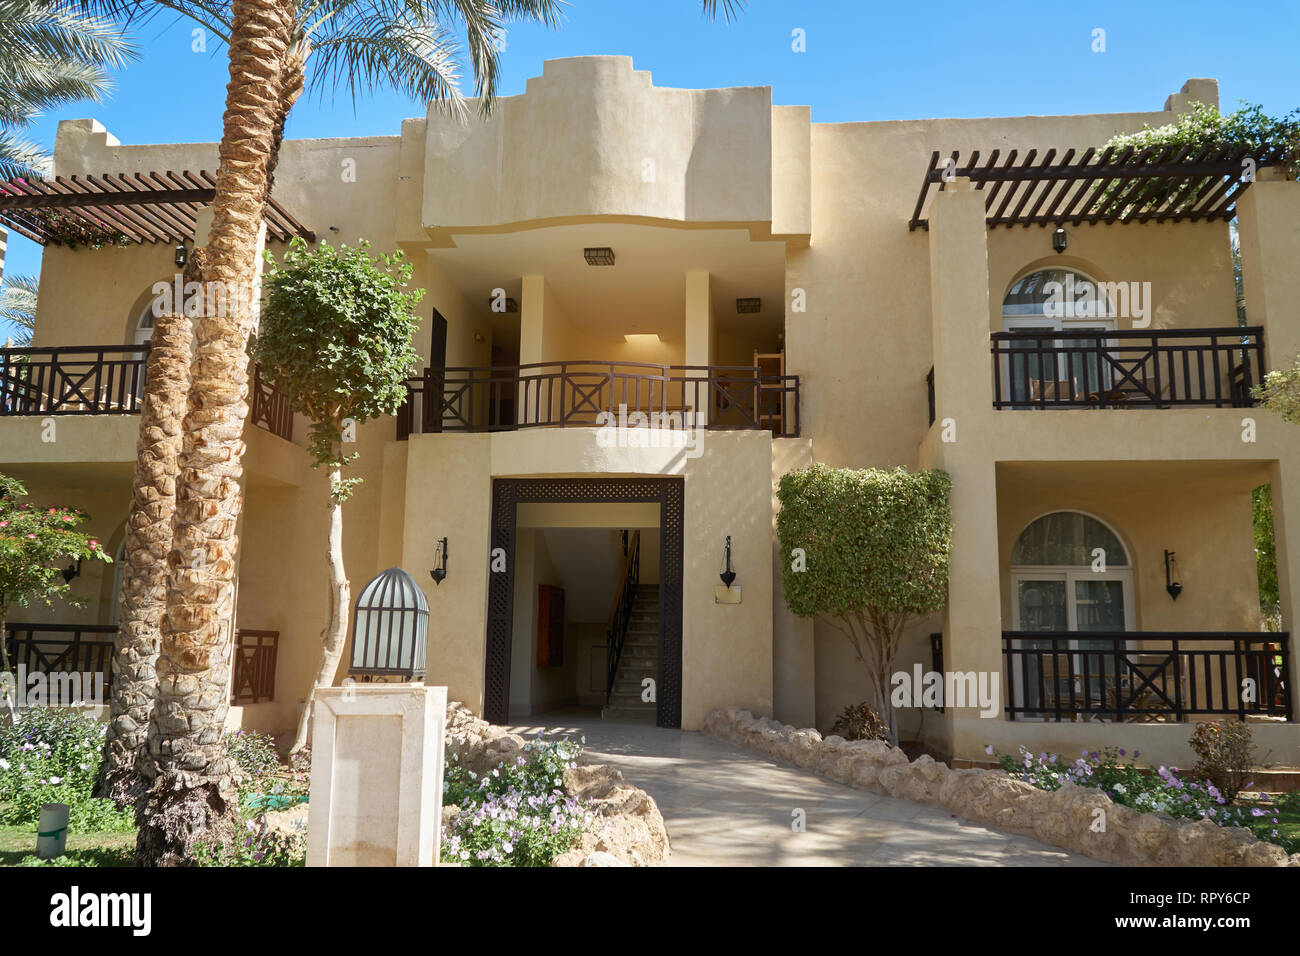 Sharm El Sheikh, Egypt - February 9, 2019: Five-star The Grand Hotel with palms Footpath between green grass in territory summer Stock Photo